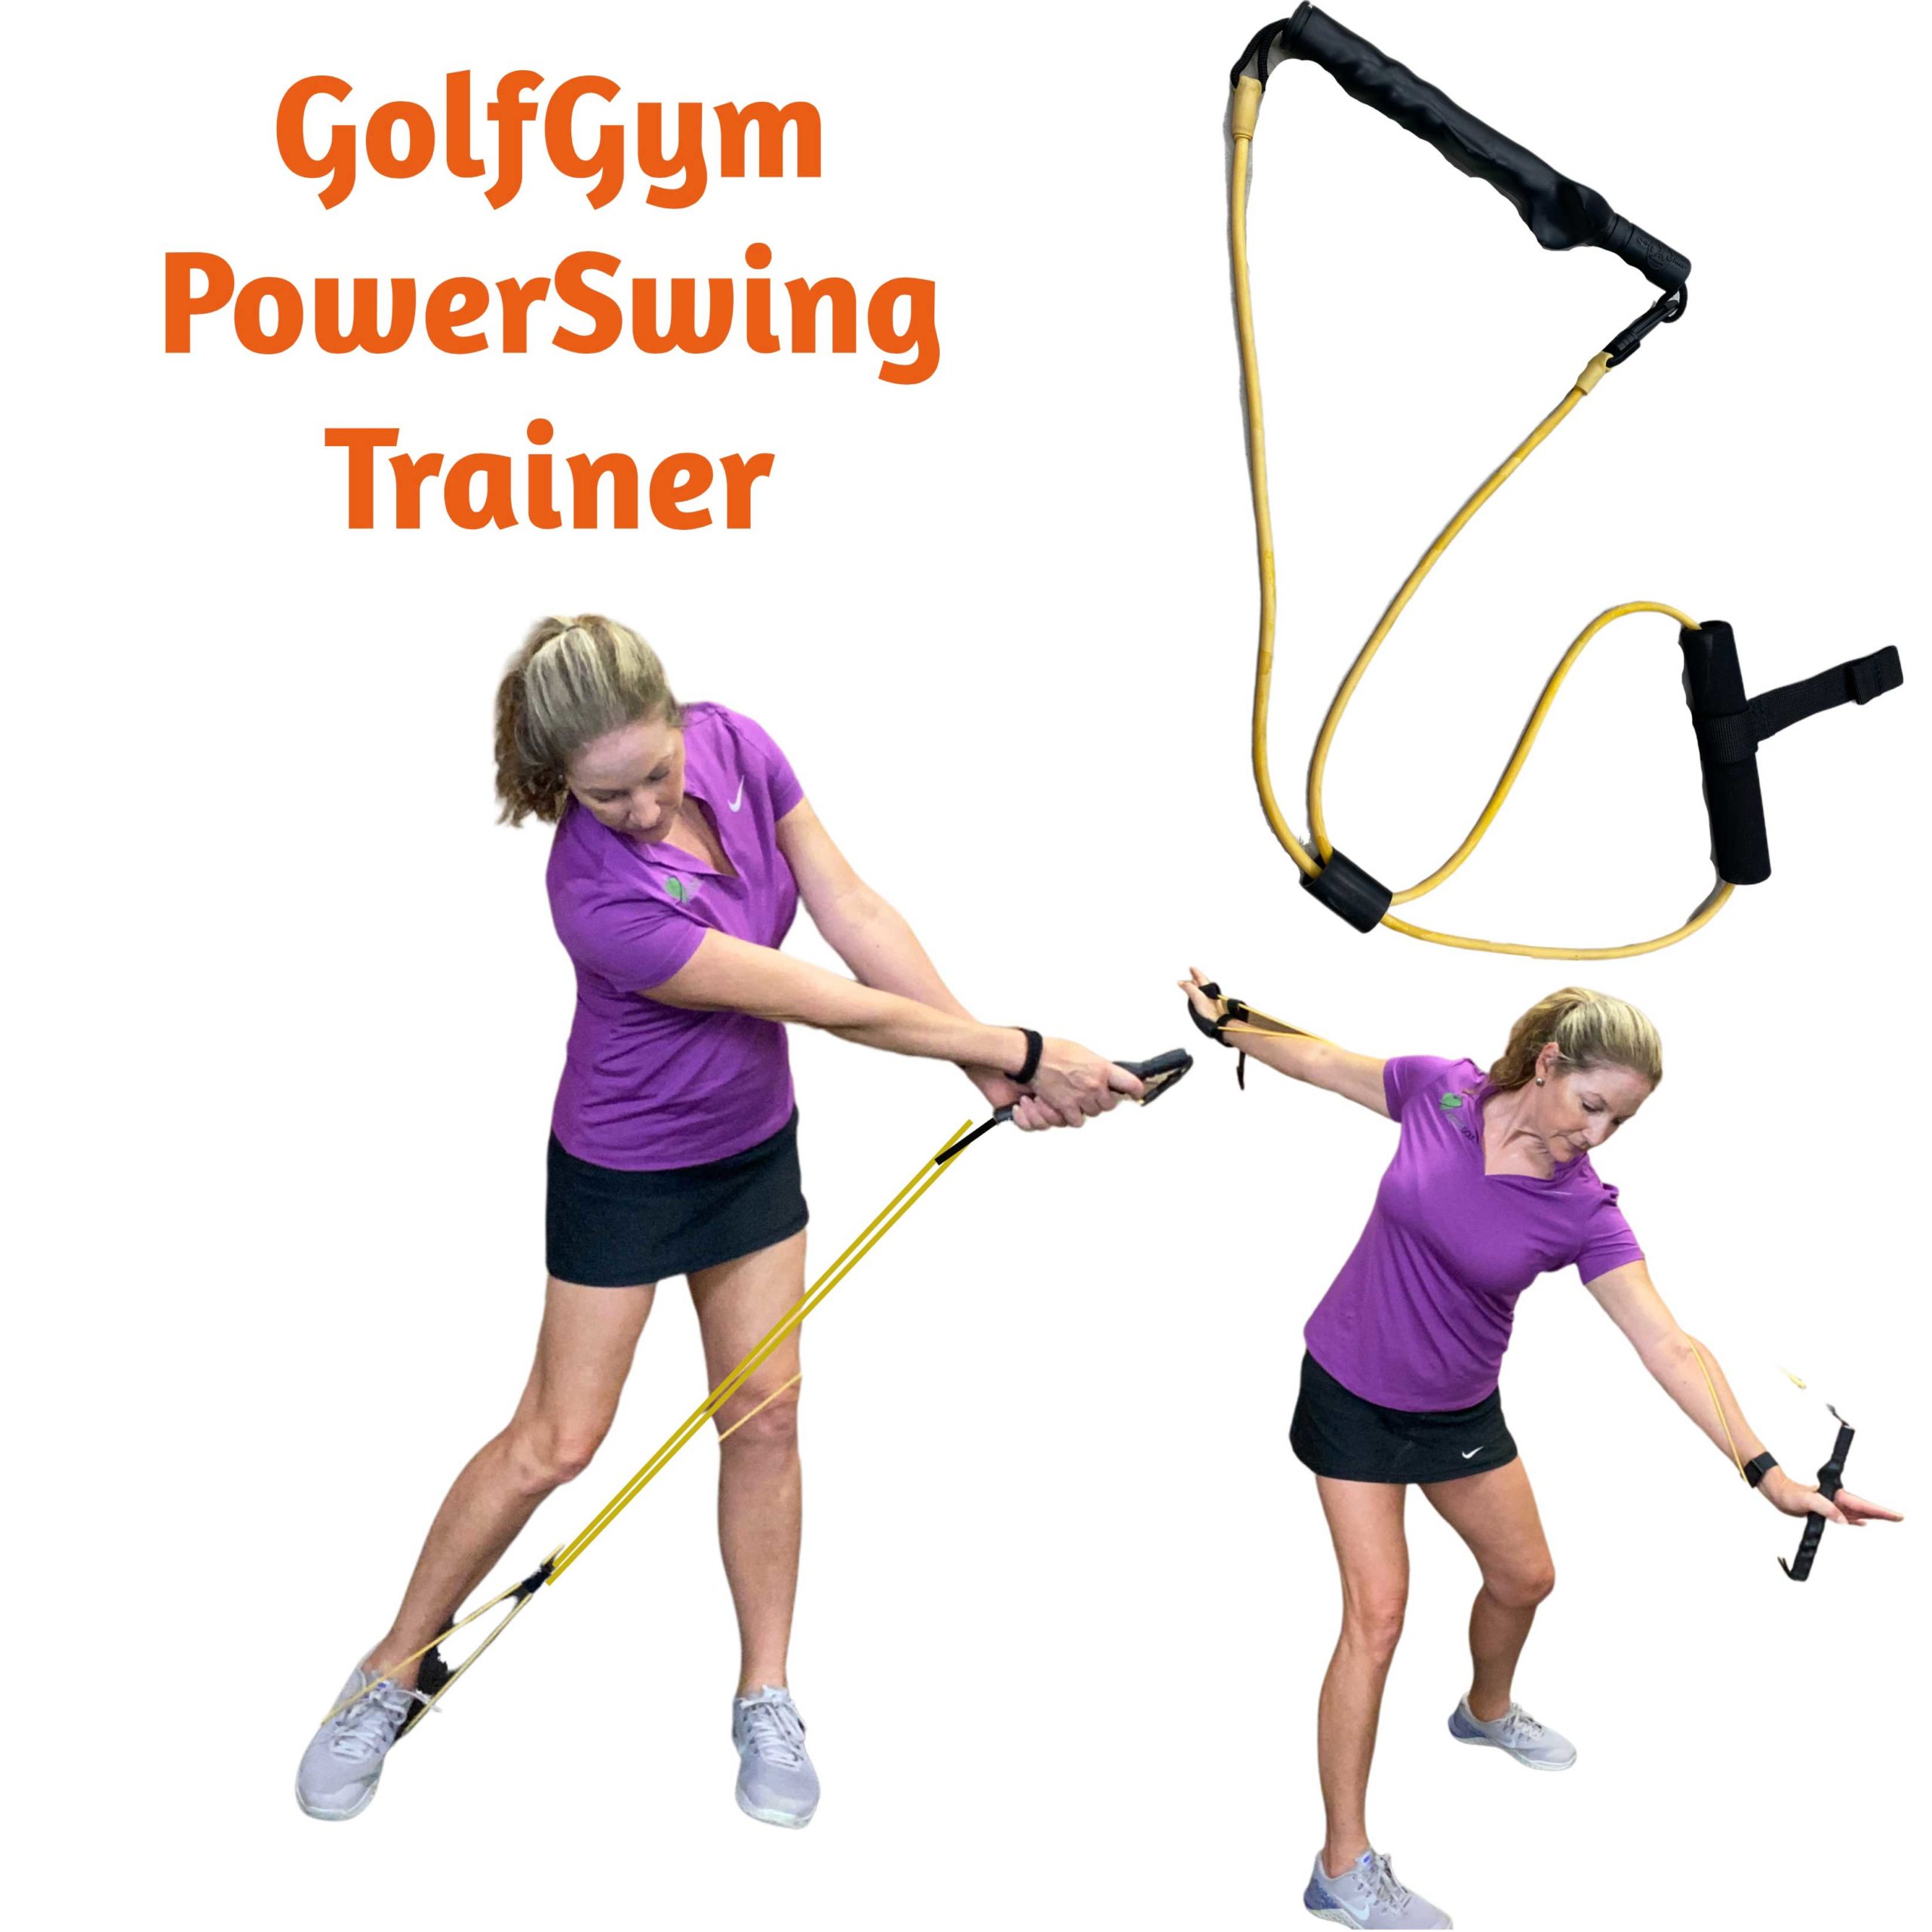 The GolfGym PowerSwing Trainer for Golf and Flexibility